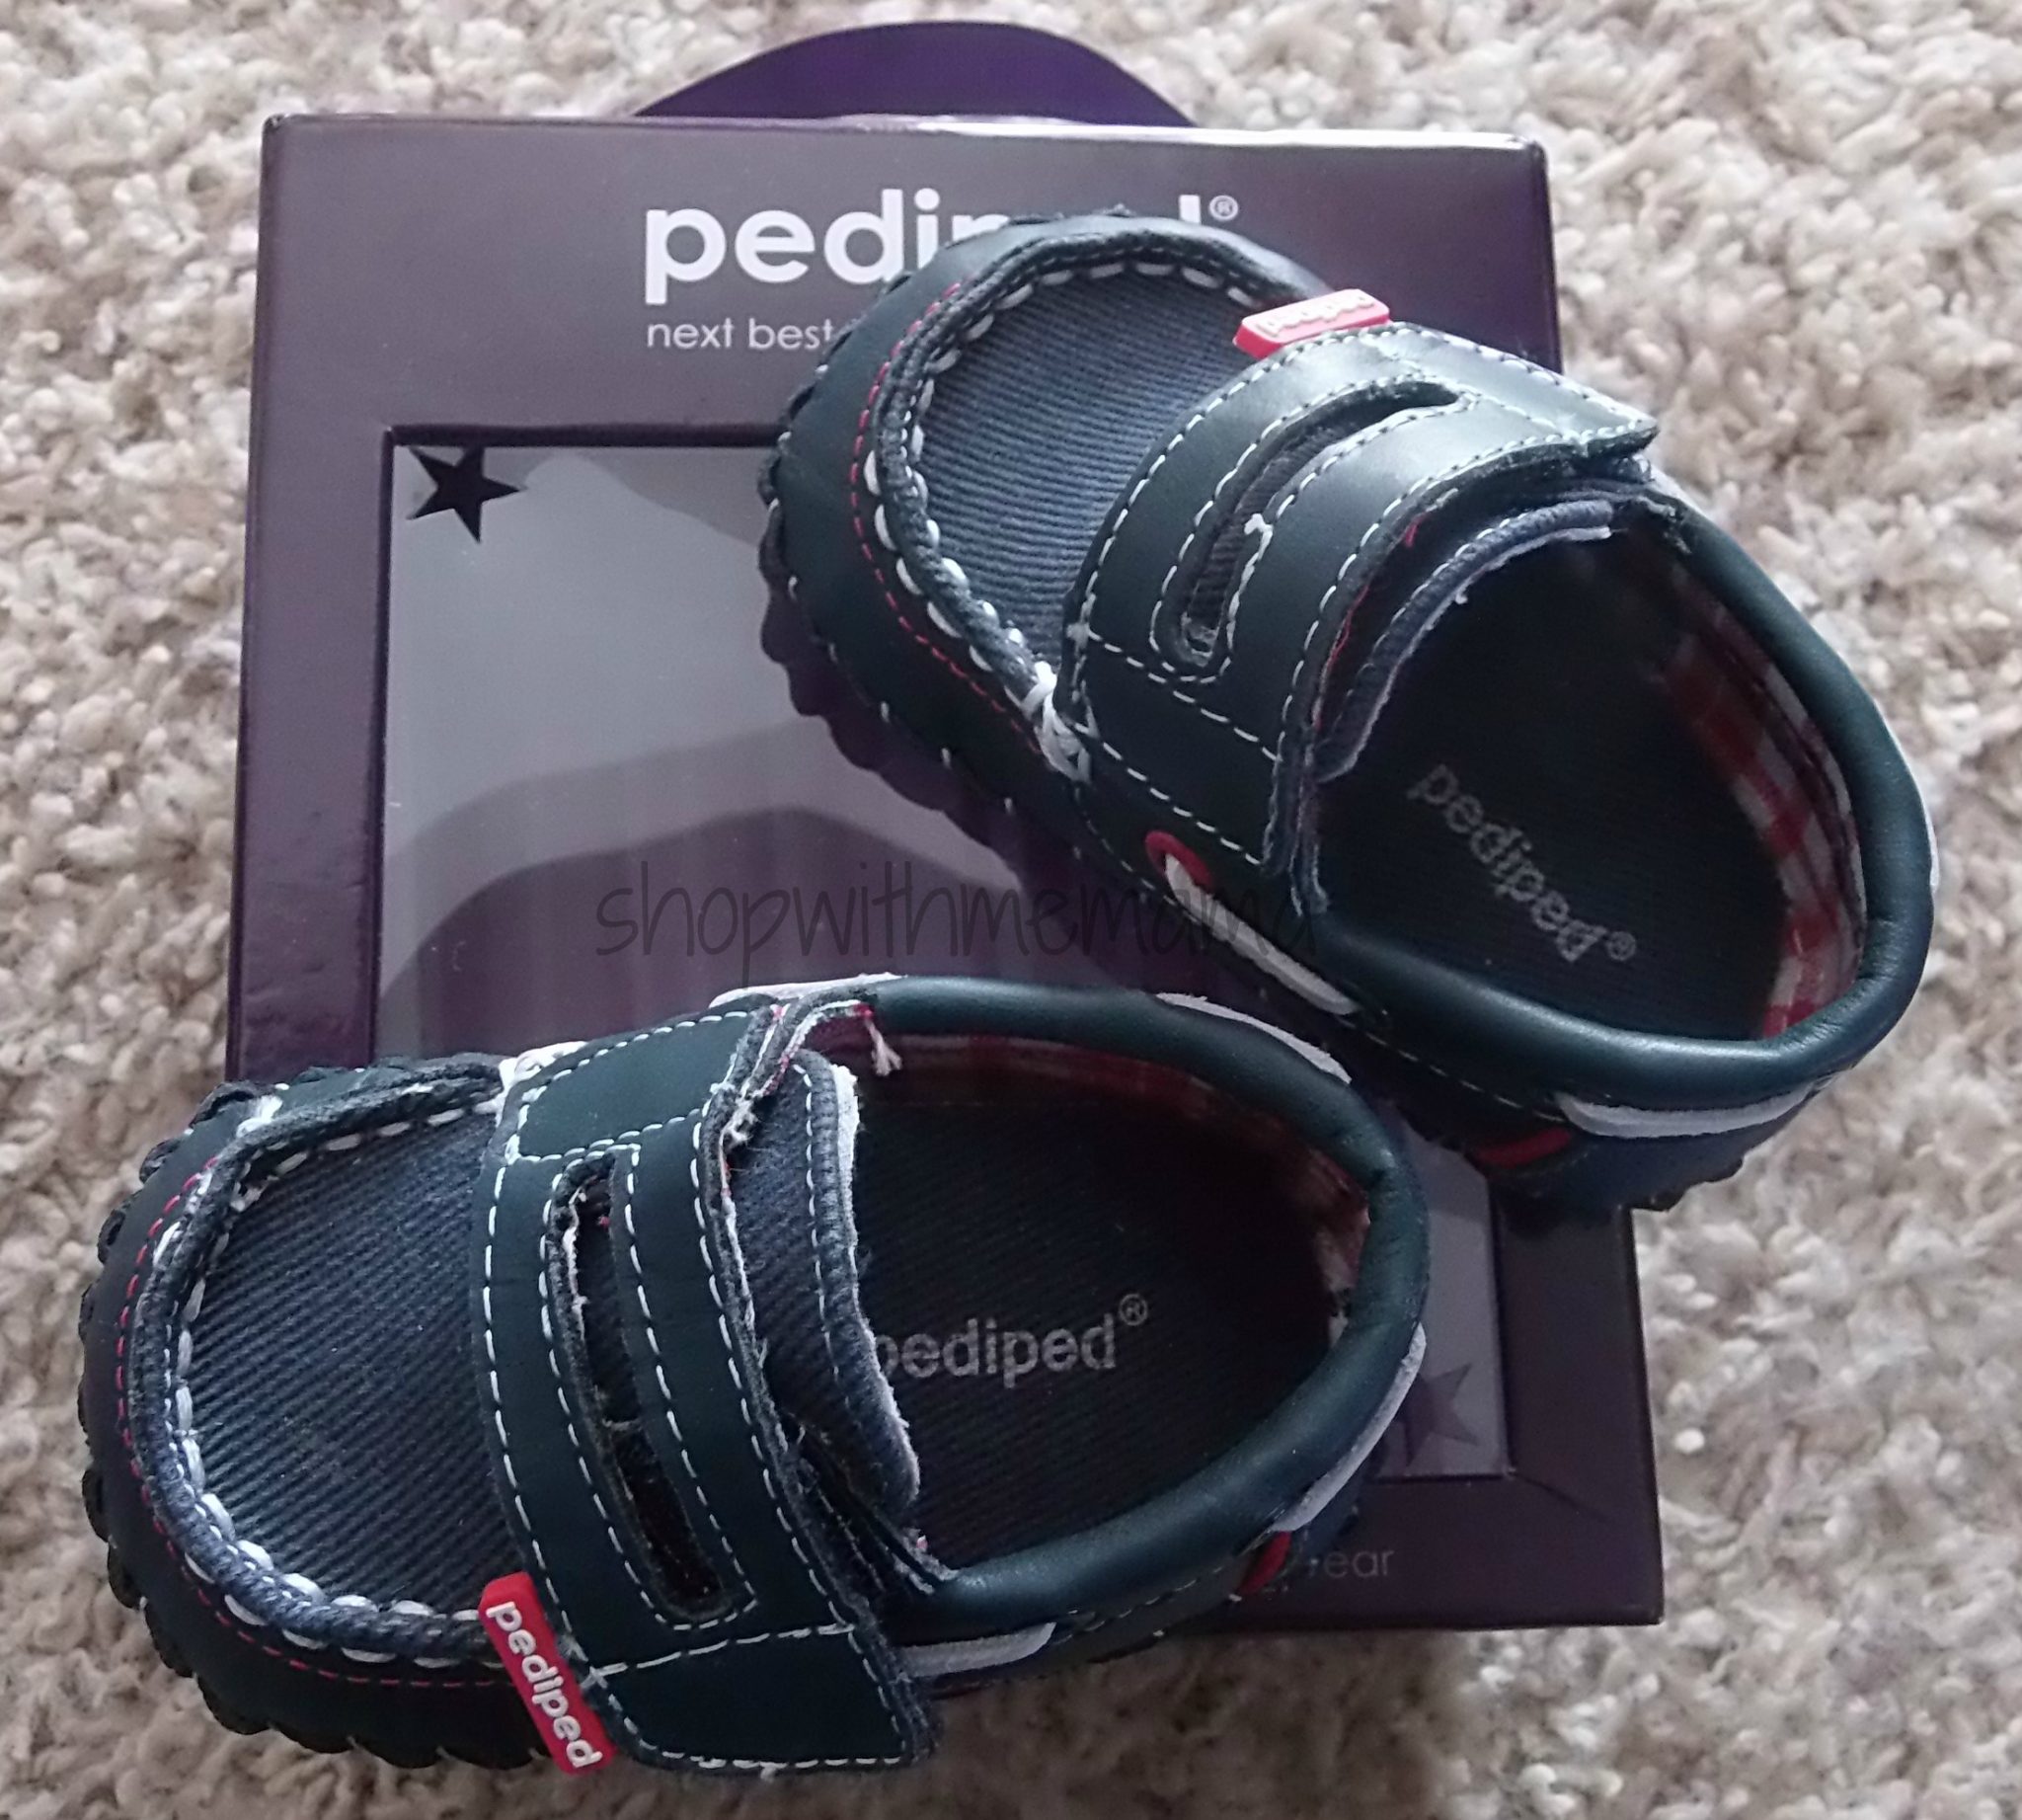 pediped® Spring/Summer 2013 Collection